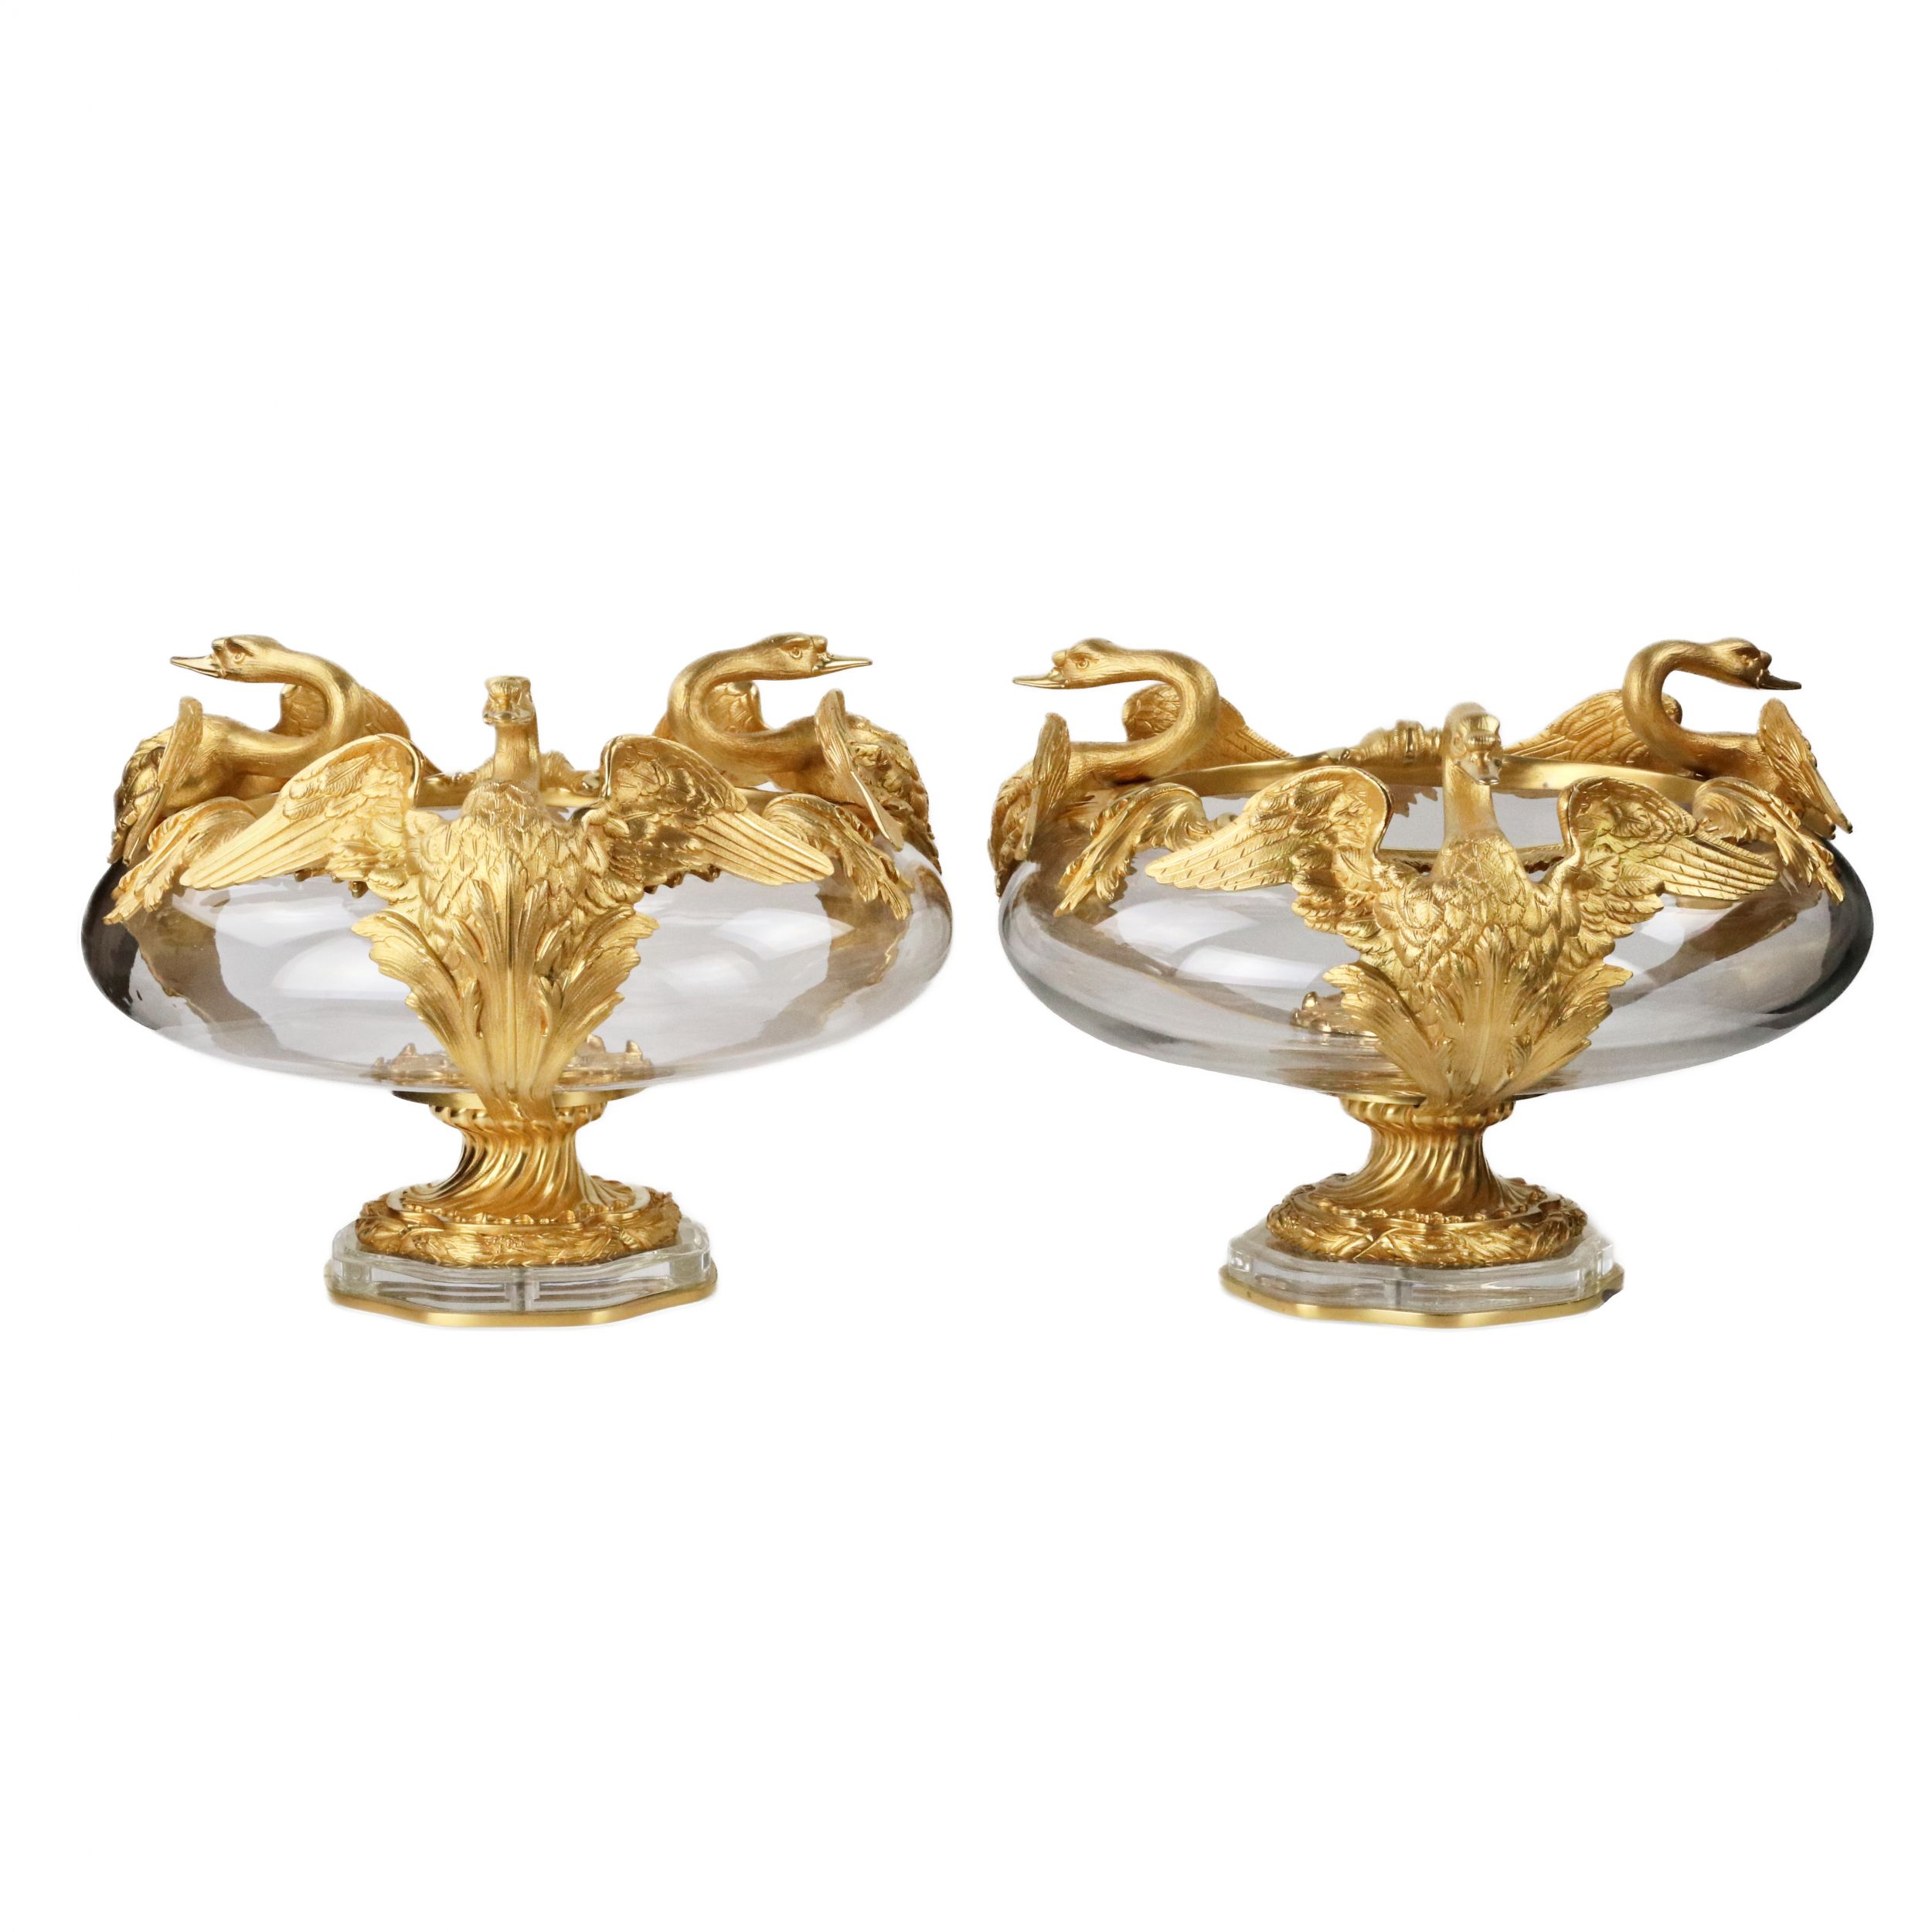 Pair-of-round-vases-in-cast-glass-and-gilded-bronze-with-swans-motif-France-20th-century-